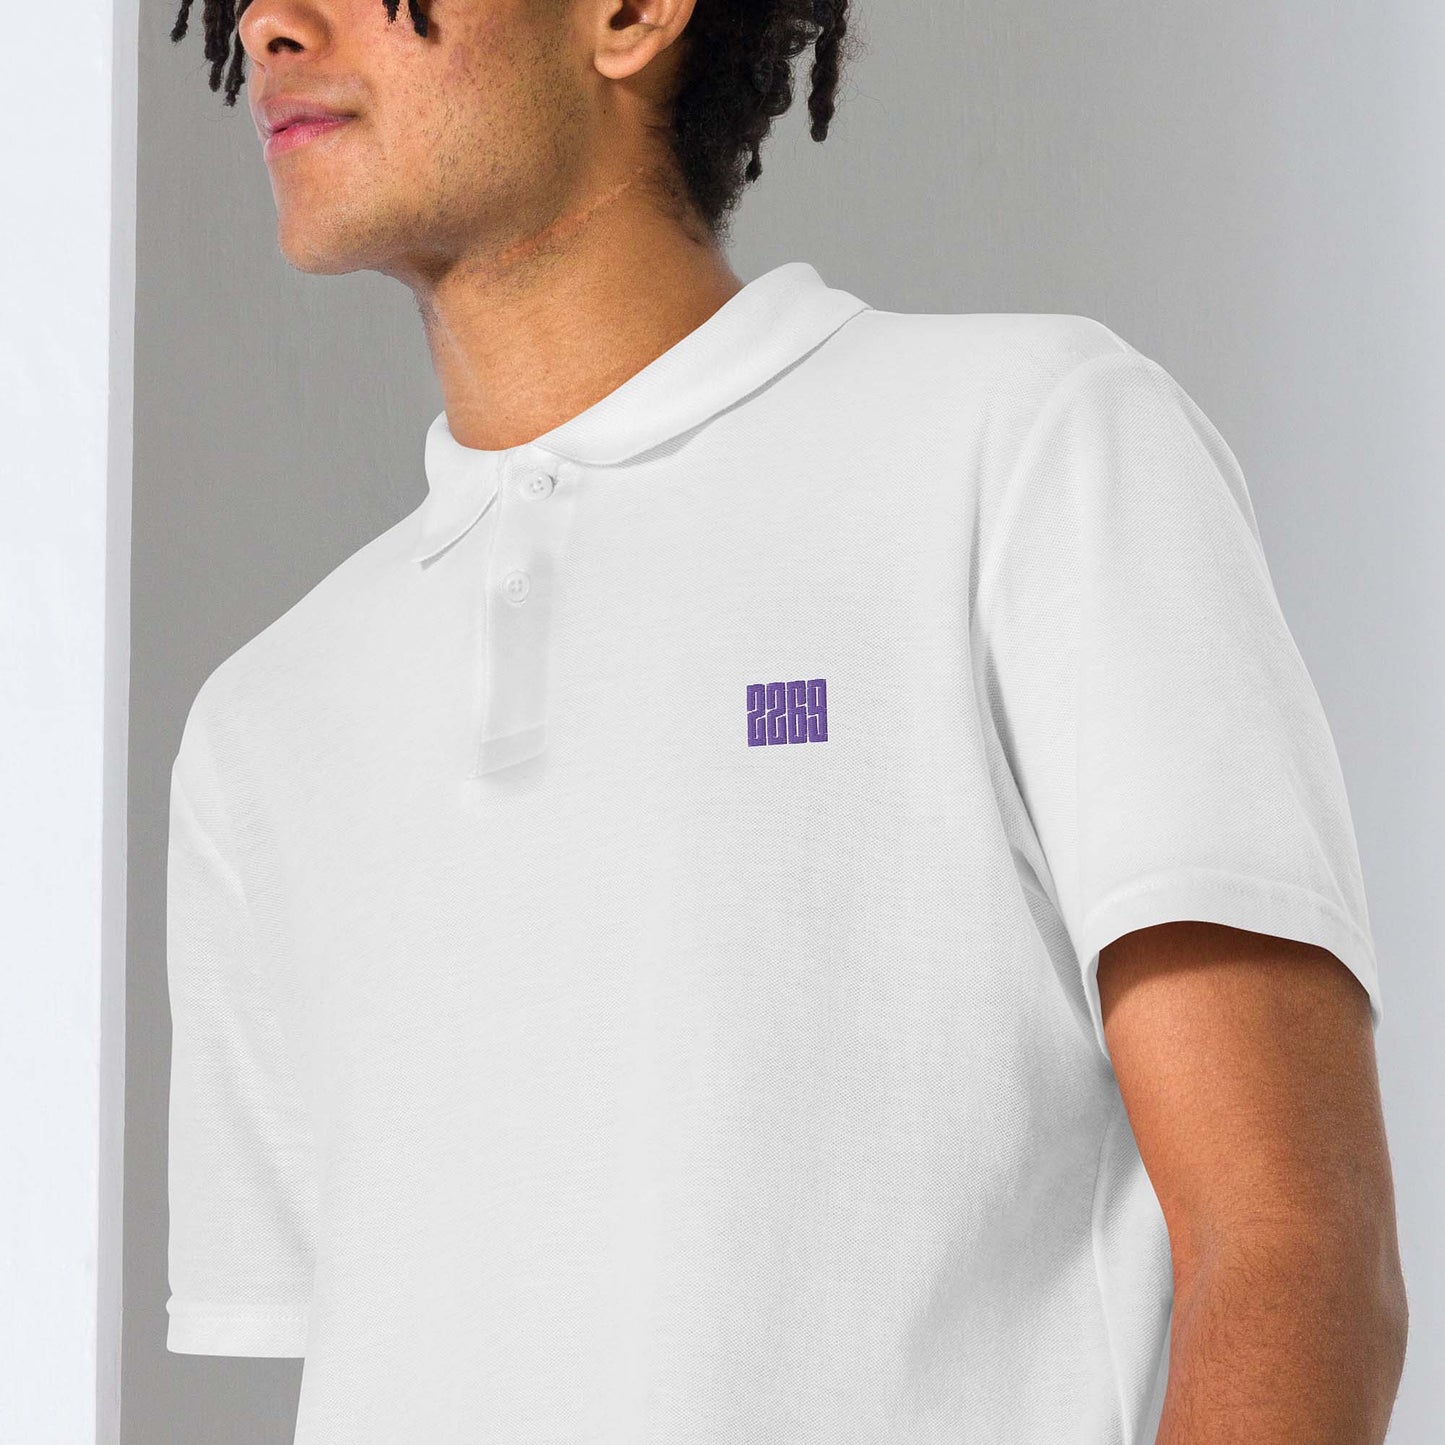 Unisex white pique polo shirt with embroidered 2269 logo